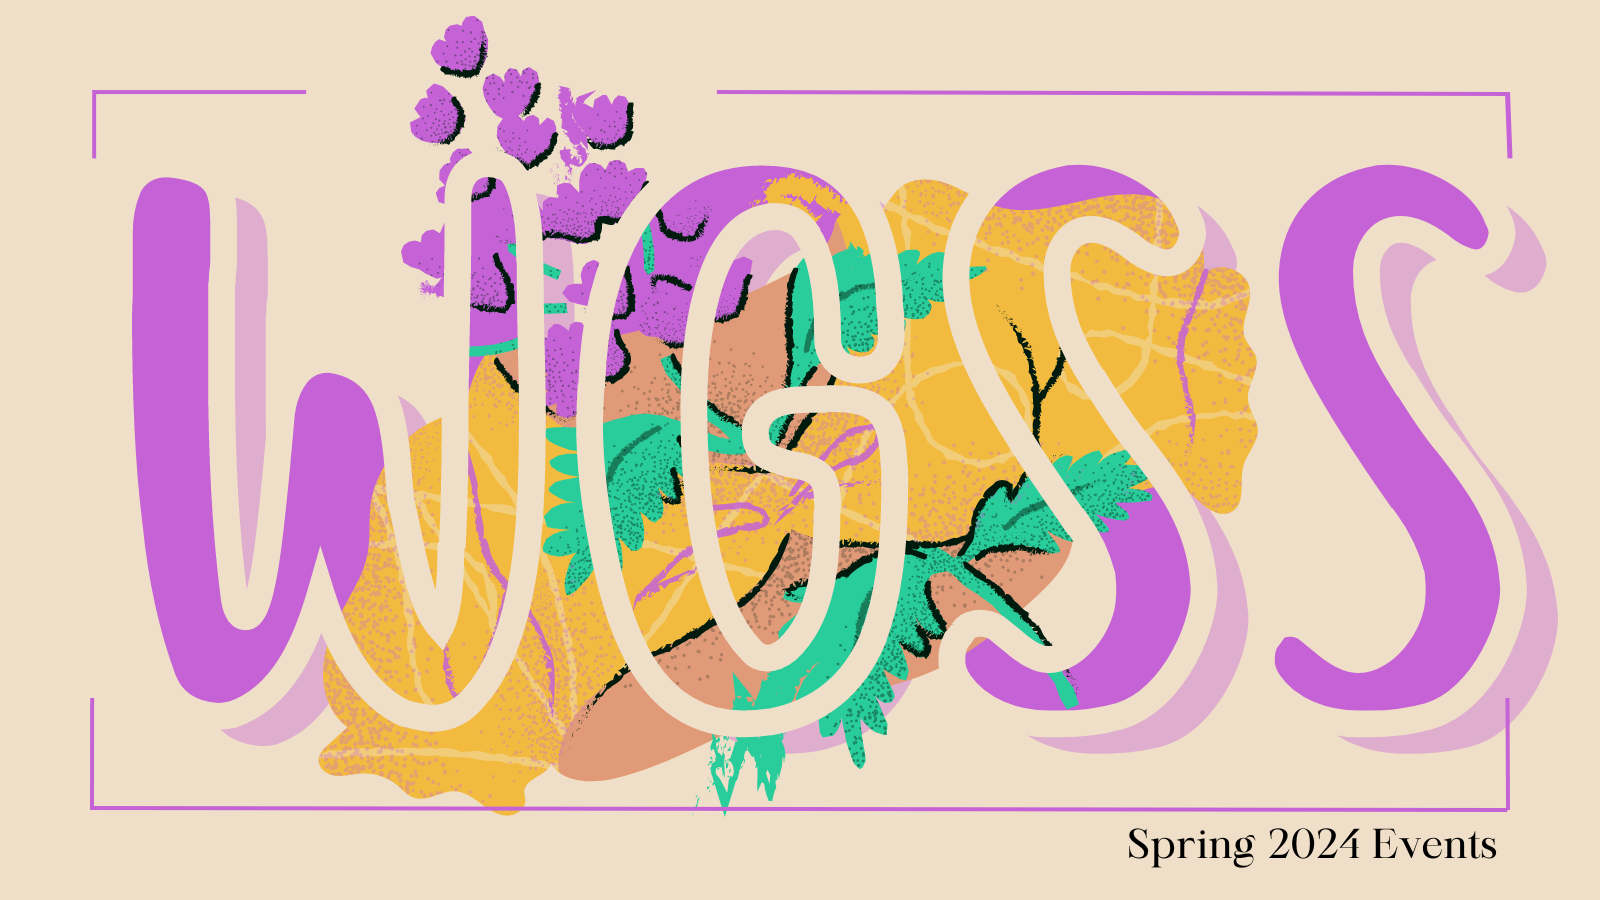 Decorative image of WGSS acronym over a paint of a yellow shirt with purple flowers